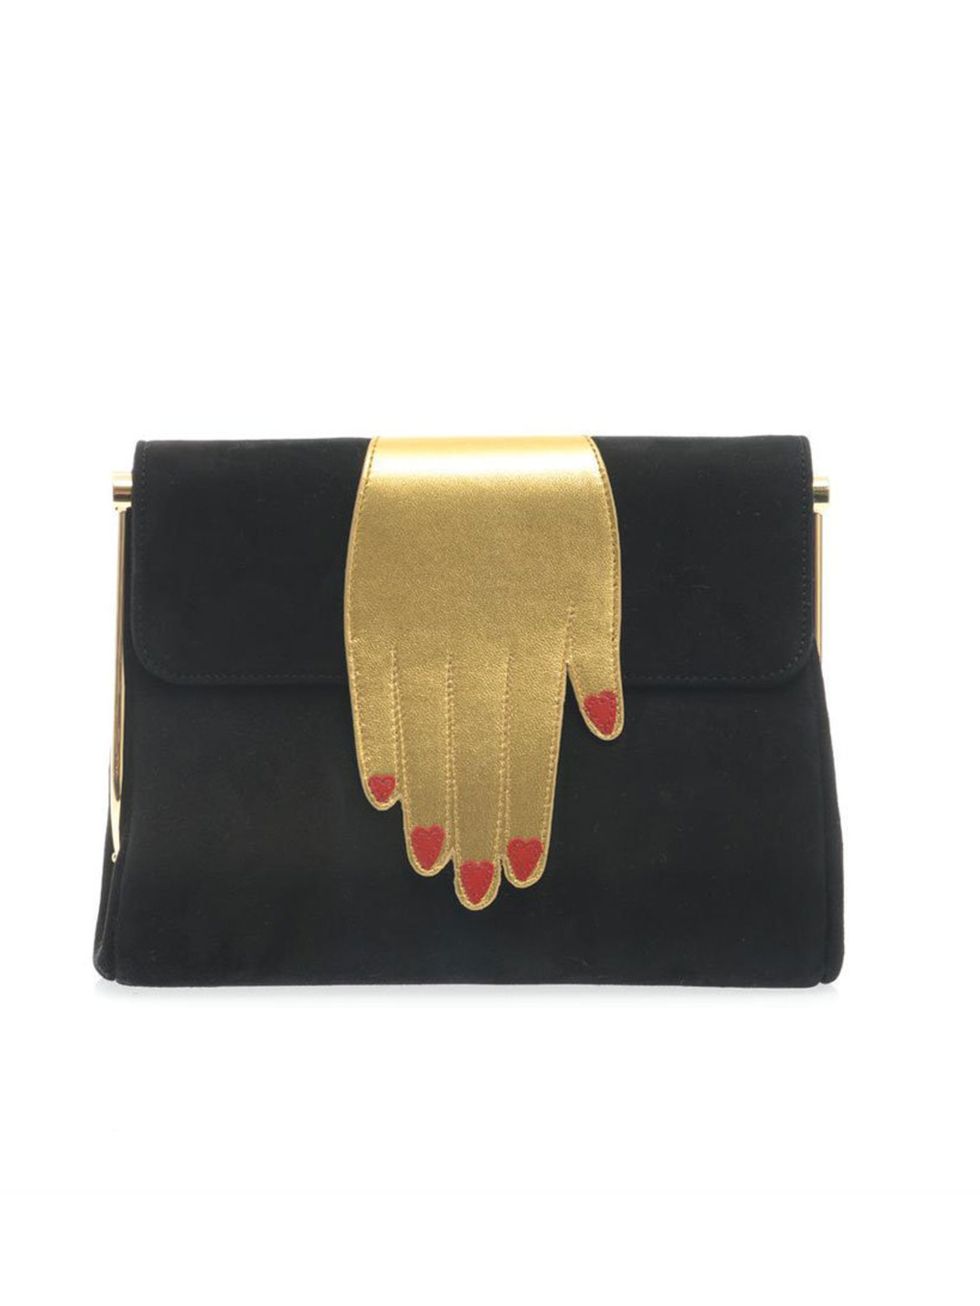 Charlotte Olympia £875, Matches